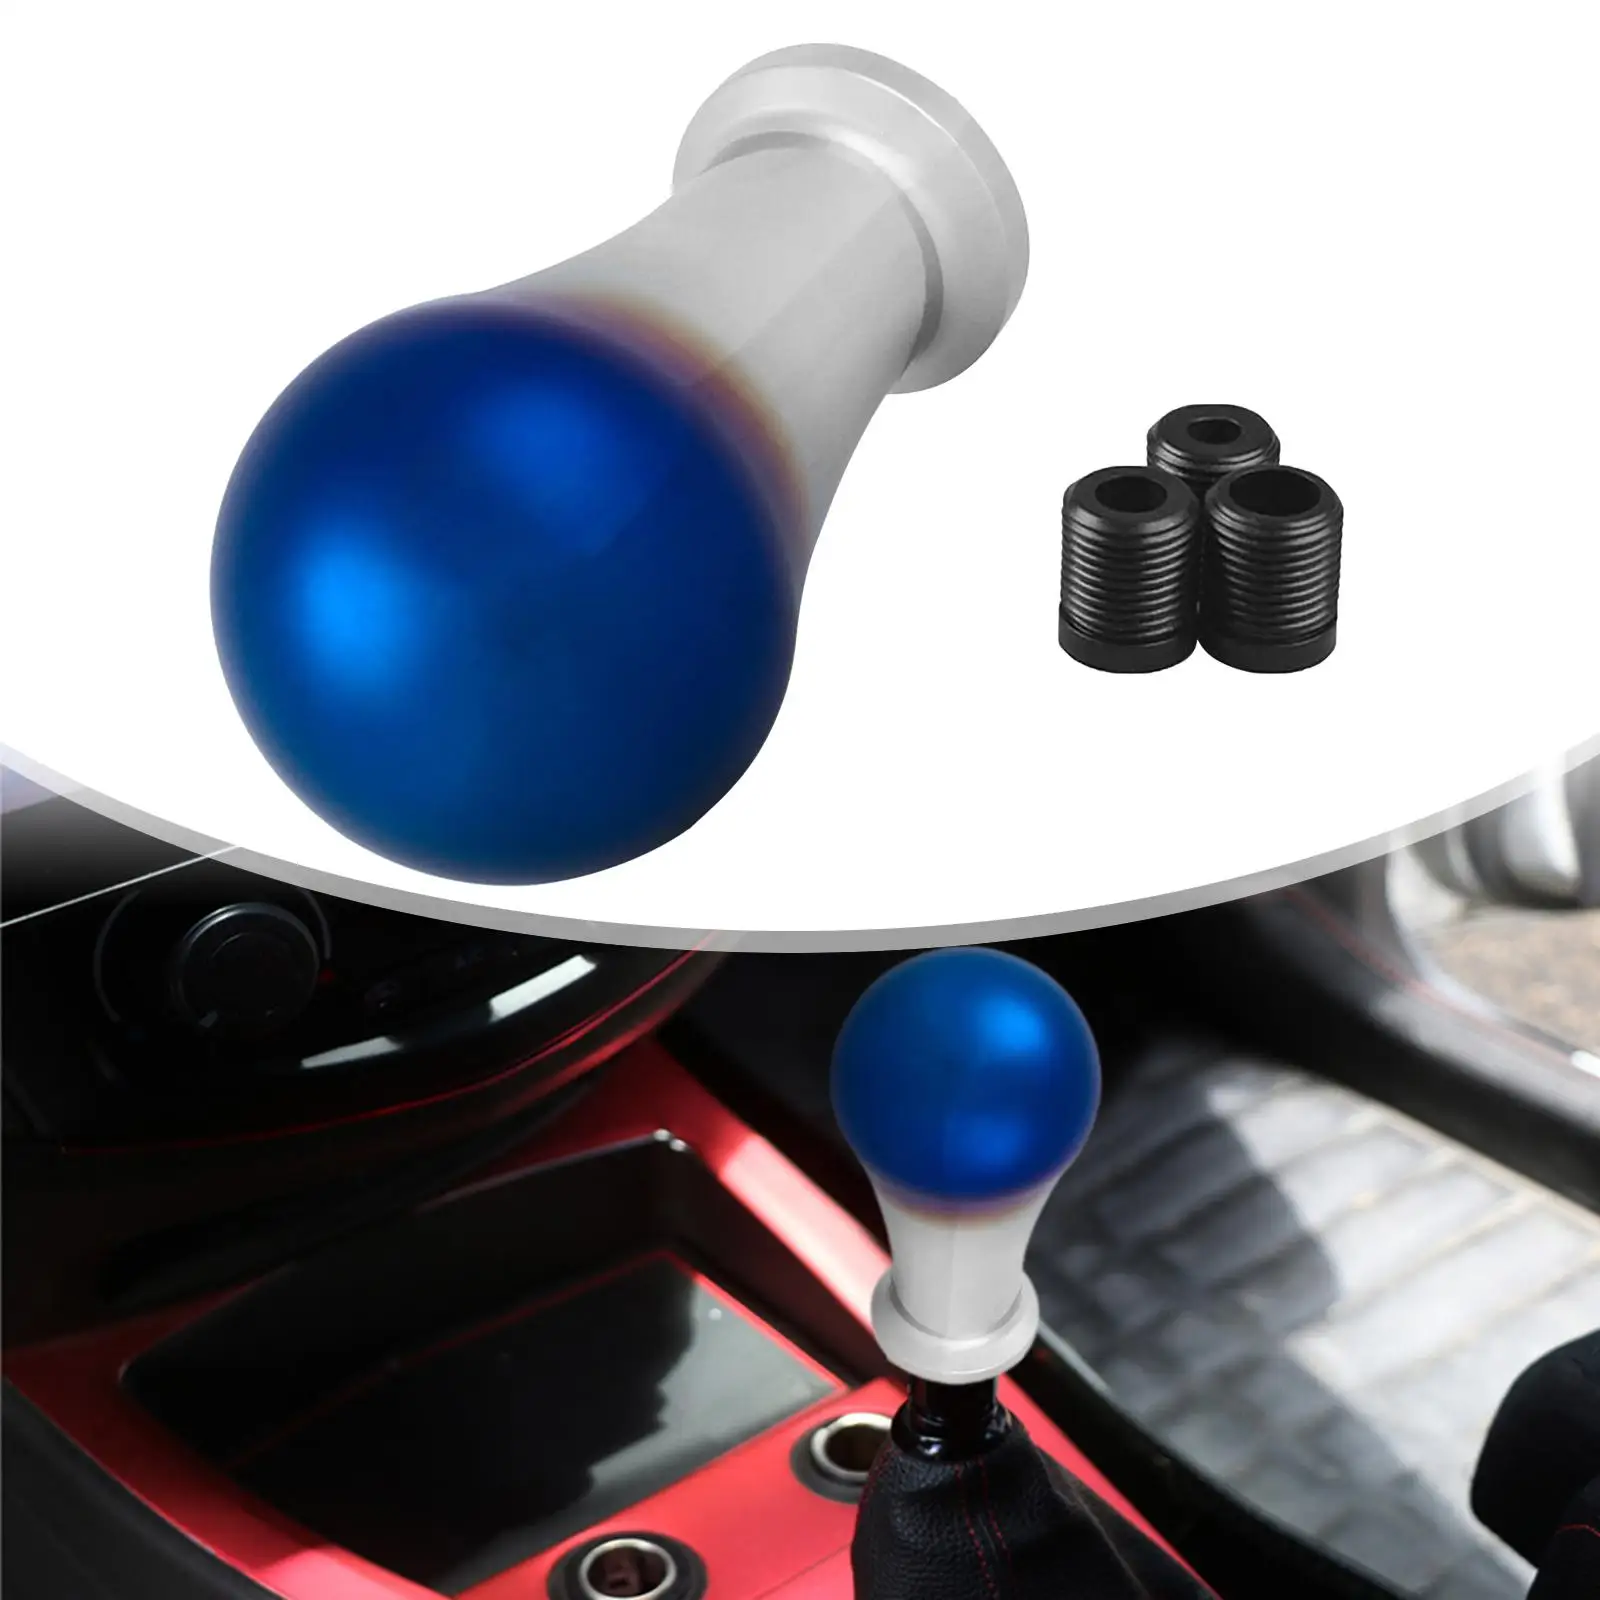 Car Shifter Knob Durable Manual Shifter Automatic Shifter Handle for Auto Vehicles Car Automotive Replacement Parts Accessories